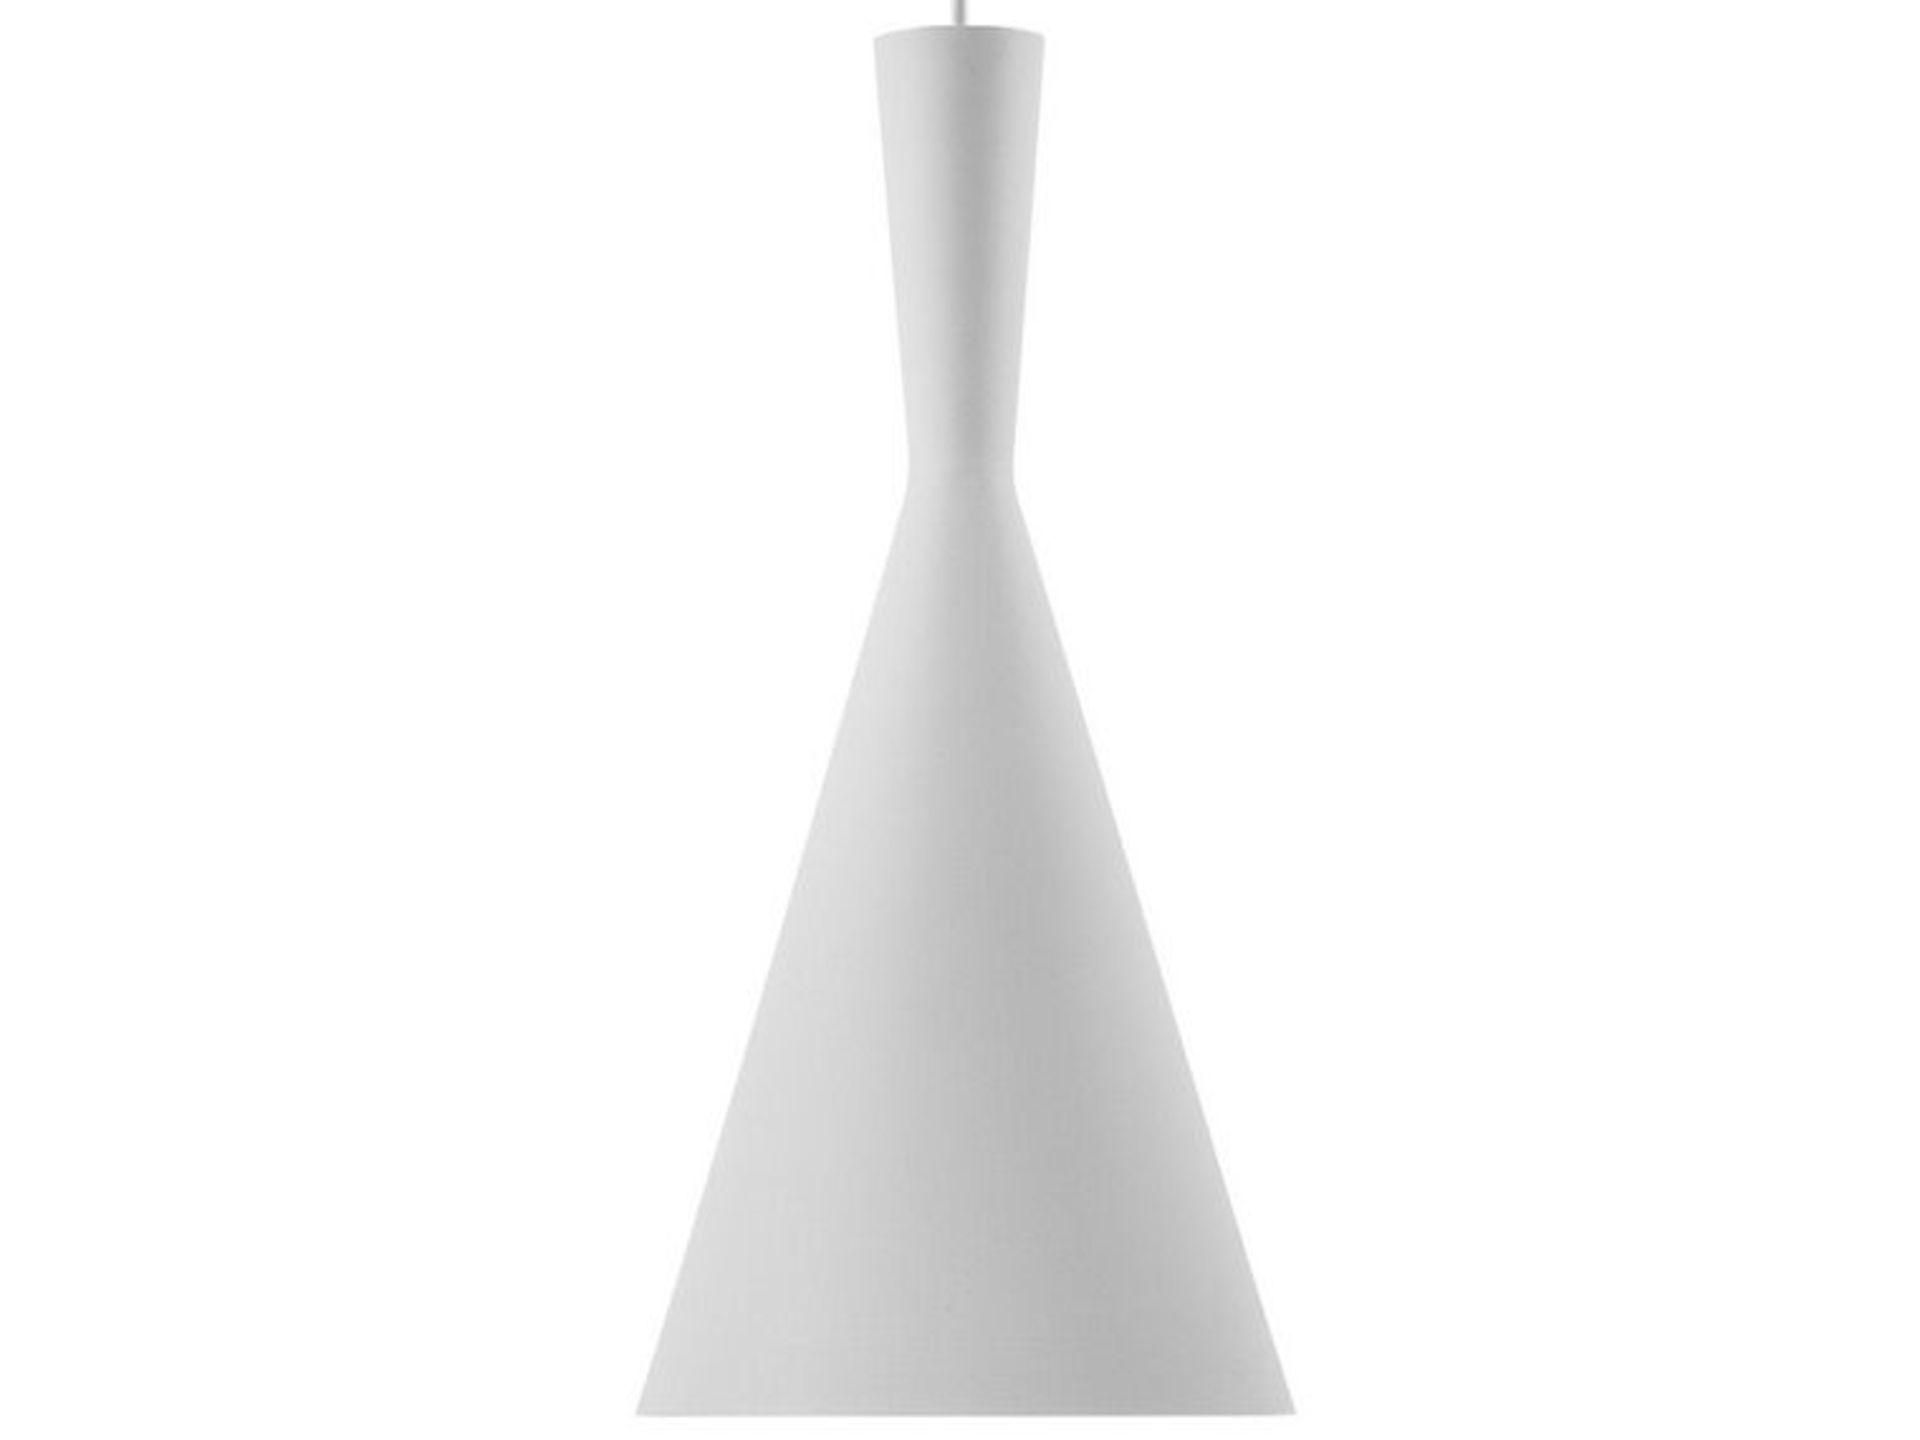 Tagus Metal Pendant Lamp White. - ER. This task lamp is a perfect combination of modern design and